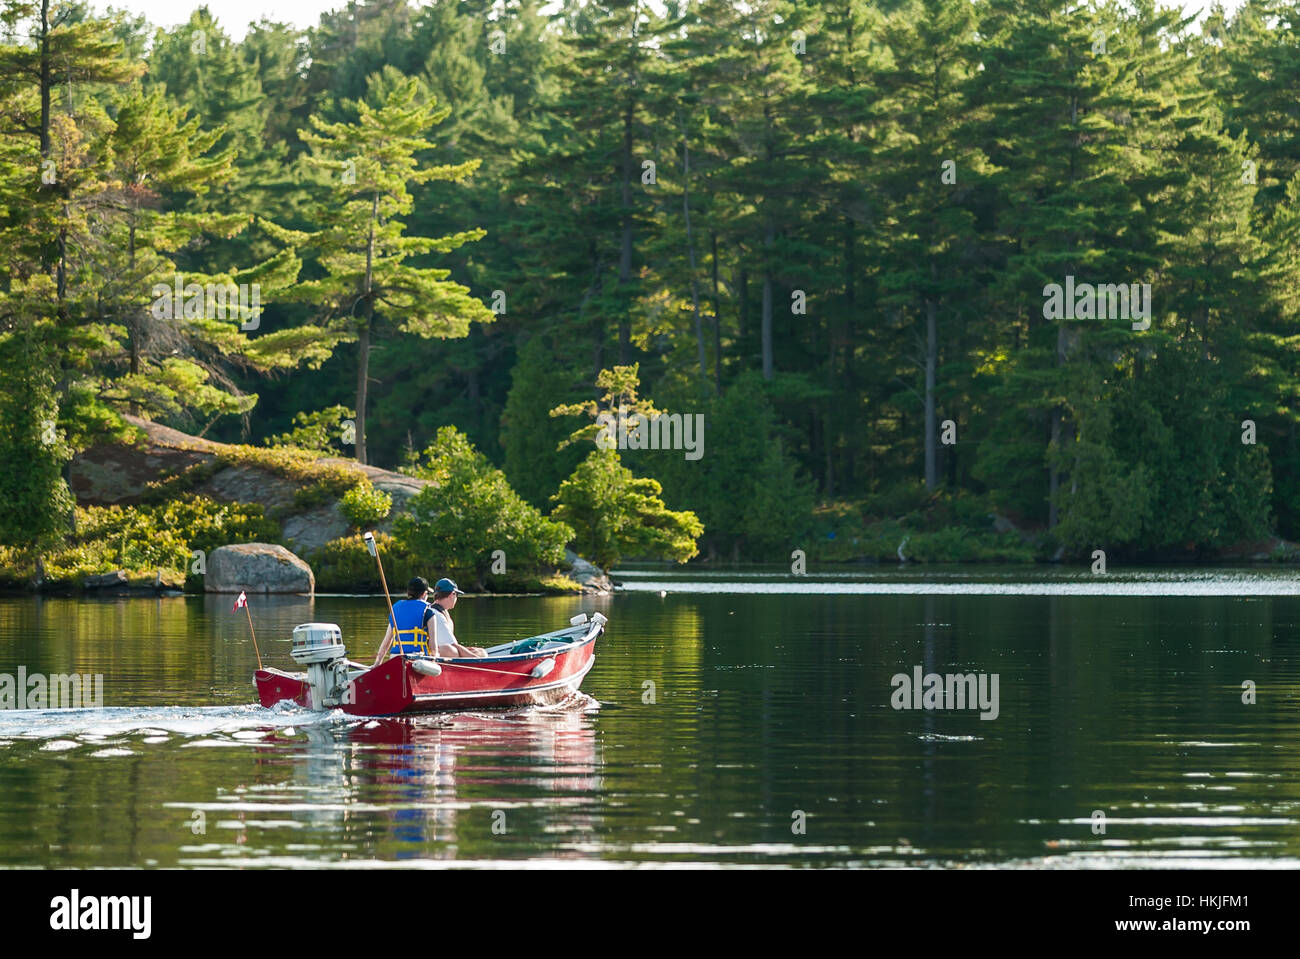 July 31, 2010 - Campbellford, Ontario, Canada - motorboats and fishing boats makes their way along the Trent-Severn Waterway in Eastern Ontario. Stock Photo